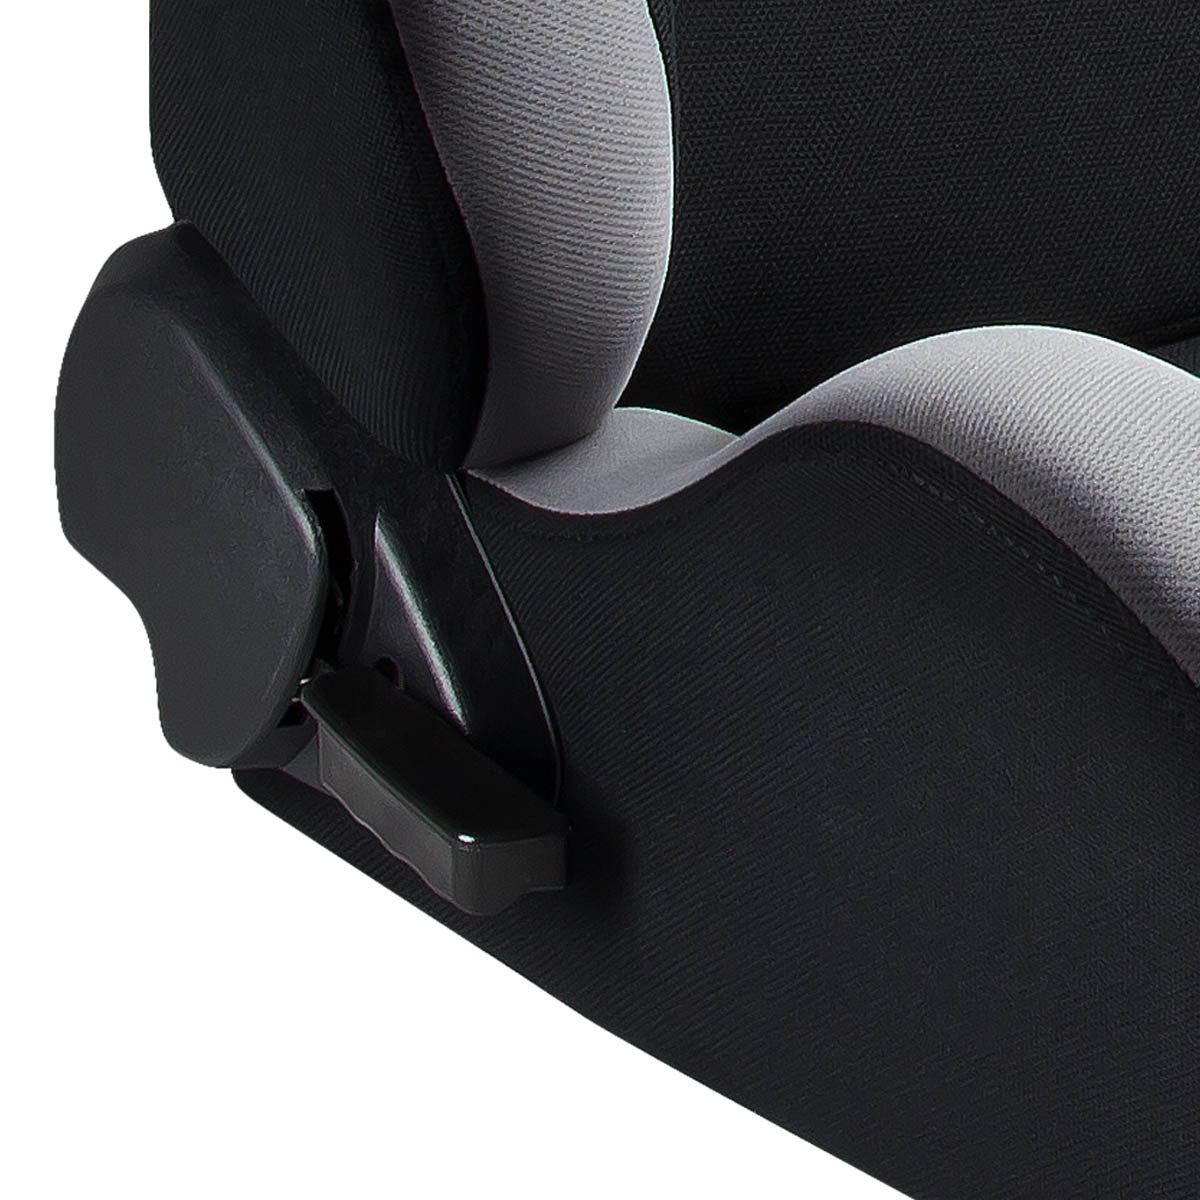 Right / Passenger Side Type-R Reclinable Fabric Cloth Racing Seat w/Universal Slider